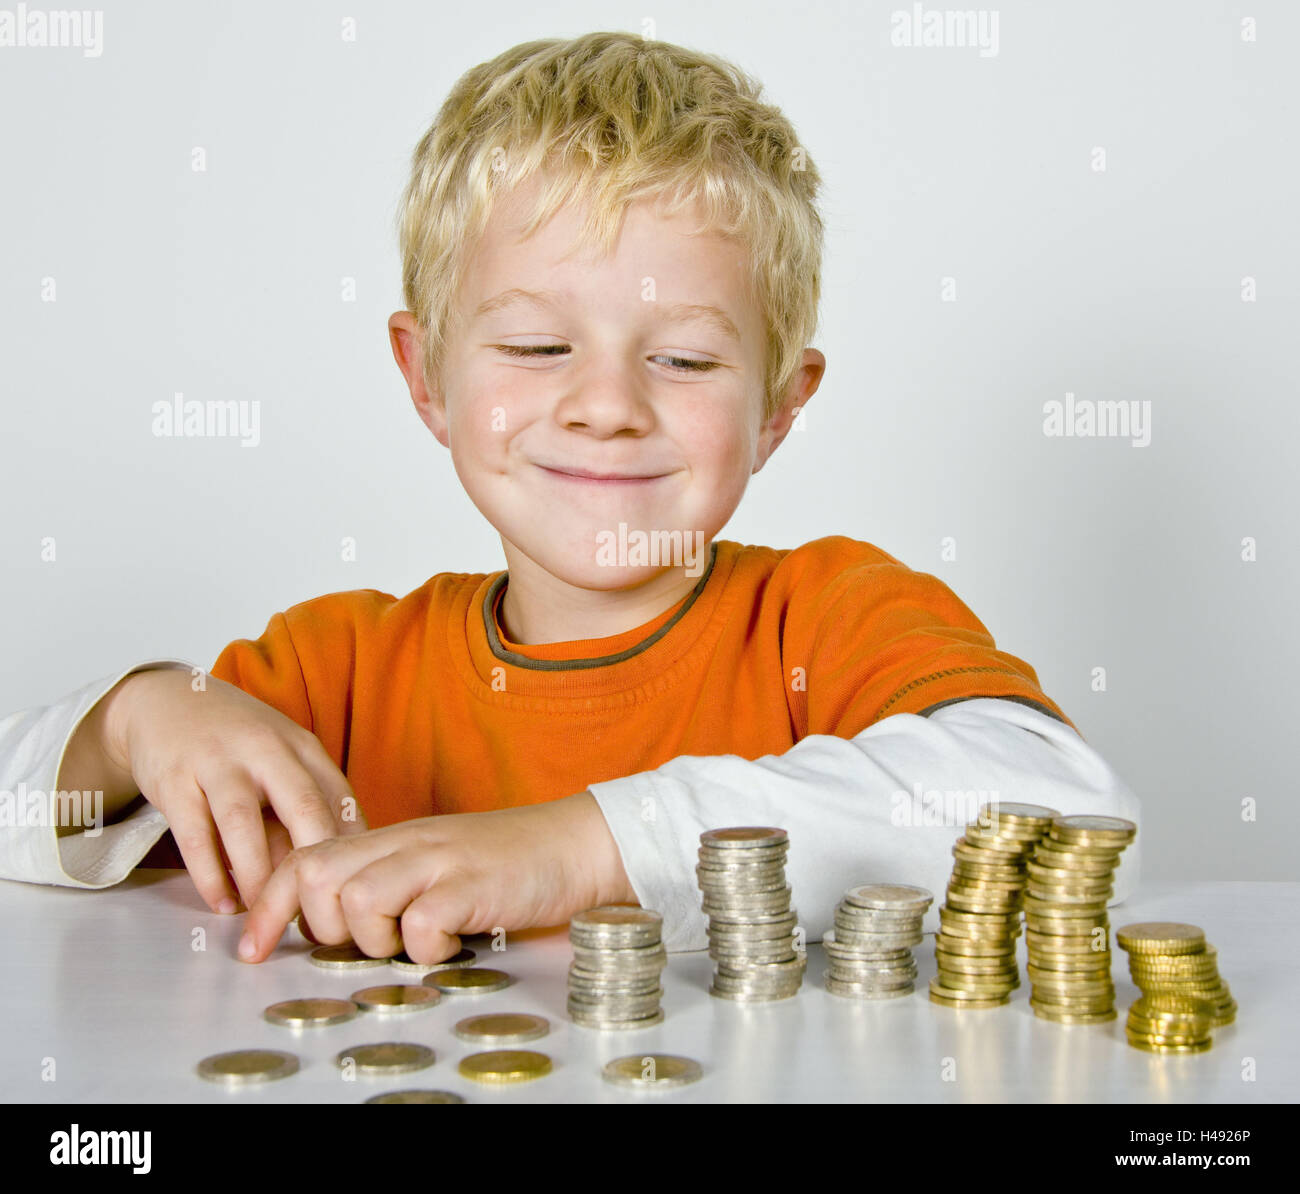 Boy, sit, money, count, monetary towers, model released, people, child, blond, view, roguishly, smile, build hard money, coins, euro, euro coins, euro coins, coin money, hard money, towers, pocket money, save, count, finances, portrait, Stock Photo